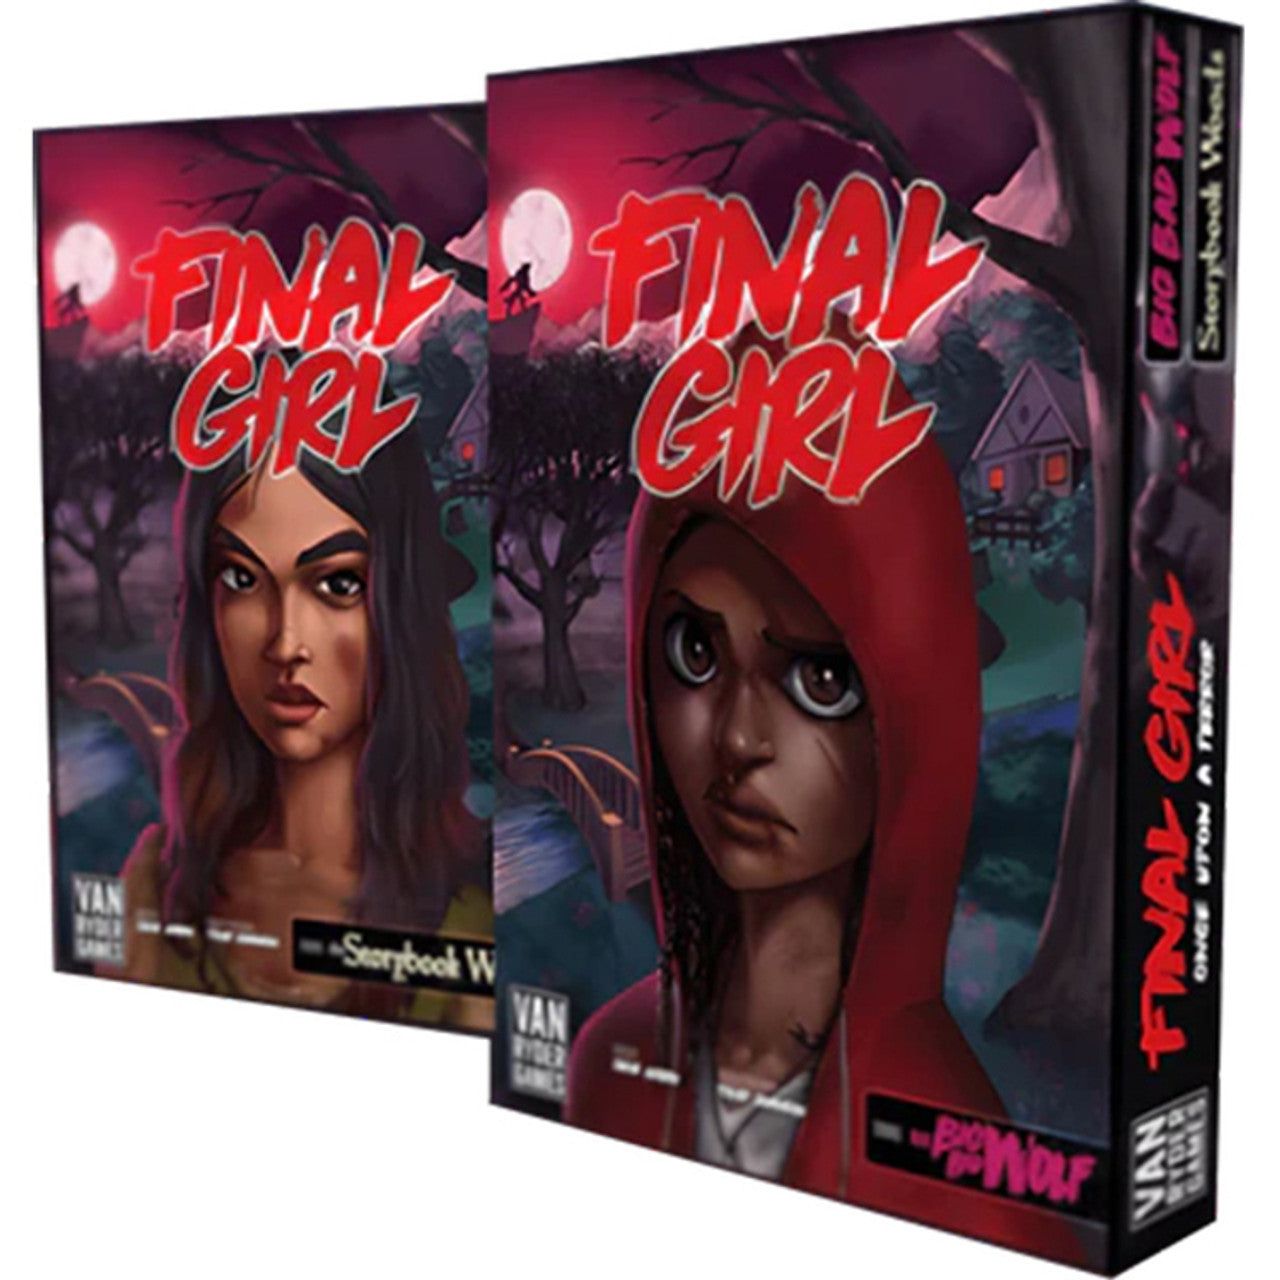 (BSG Certified USED) Final Girl: Series 2 - Once Upon A Full Moon